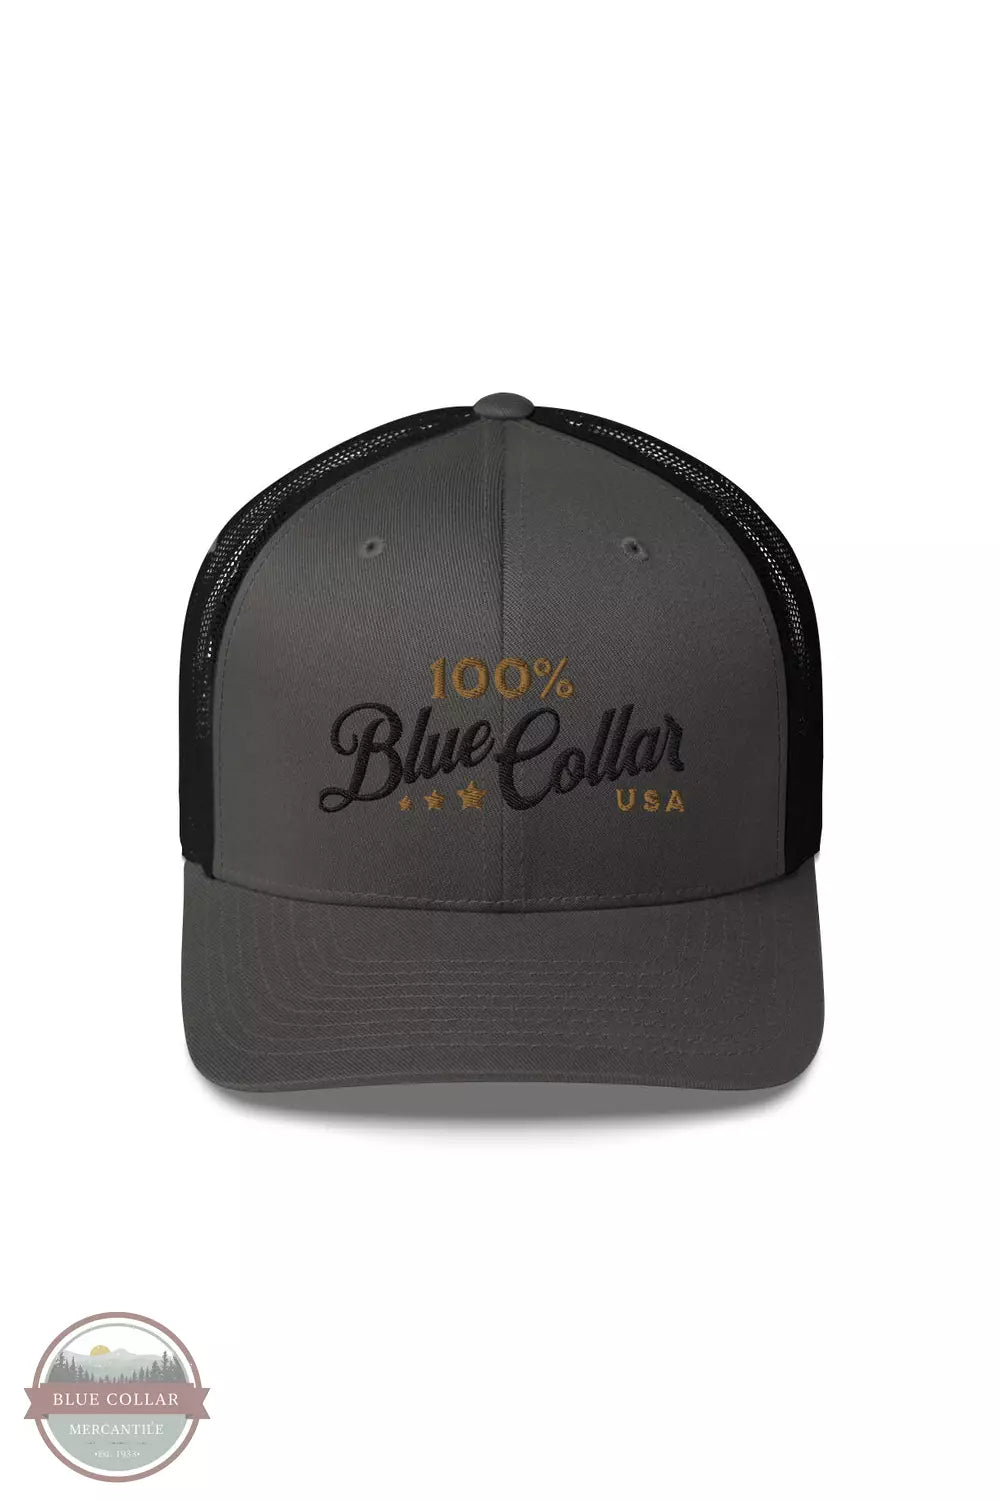 100 Percent Blue Collar 1BC008 100% Blue Collar USA Cap in Charcoal/Black Front View